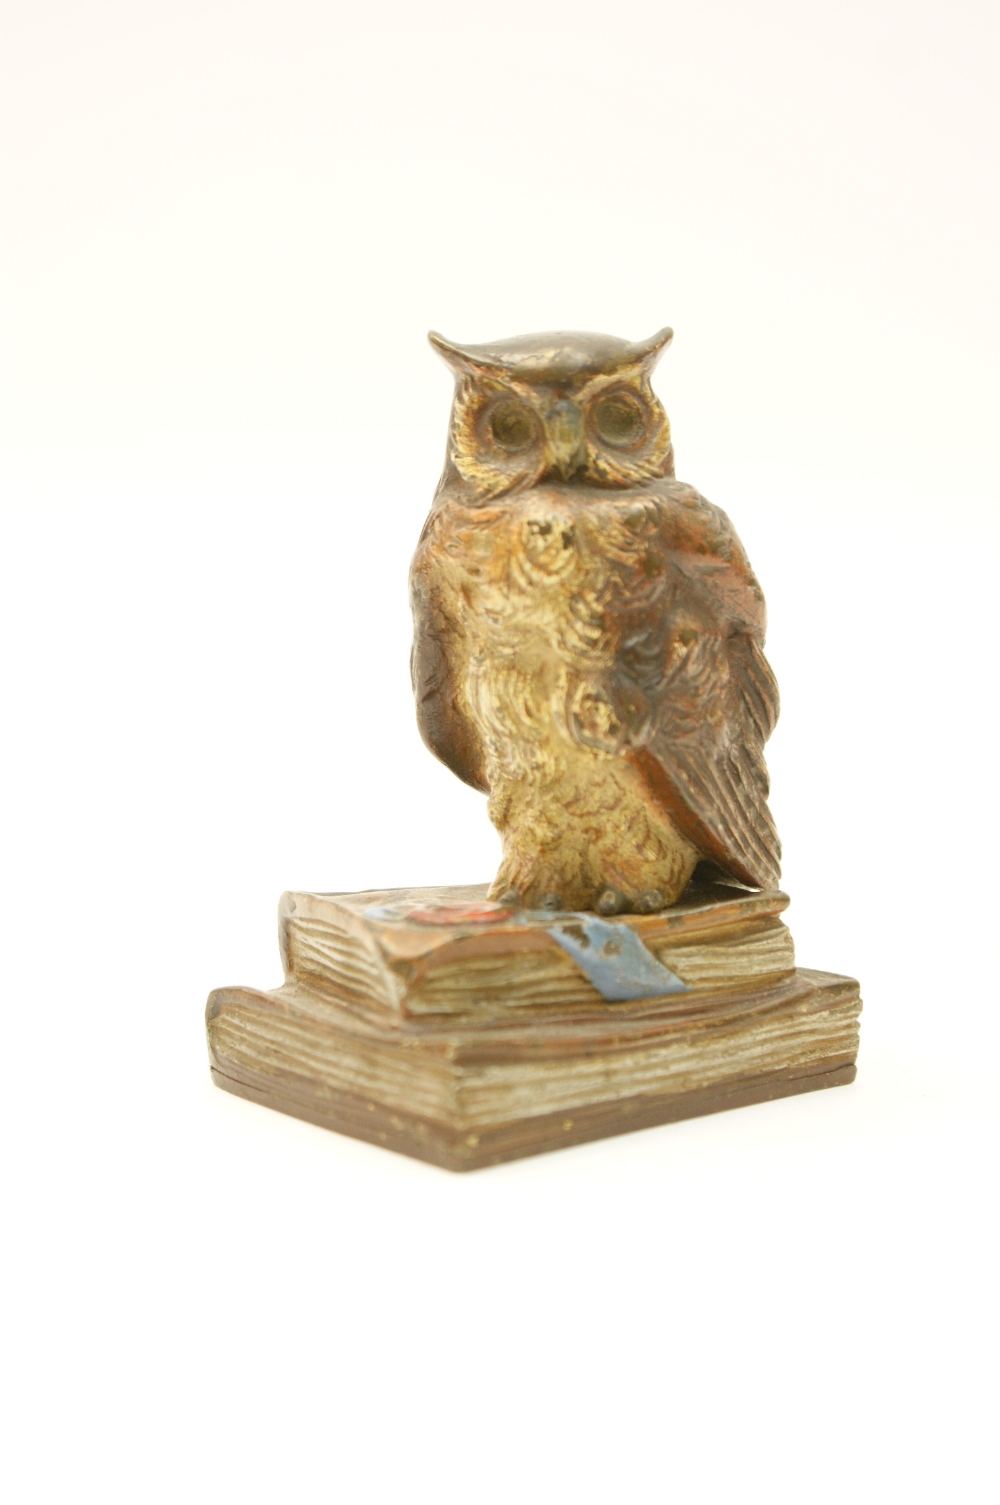 Austrian cold painted bronze paperweight in the form of an owl standing on books, signed 'Charles,